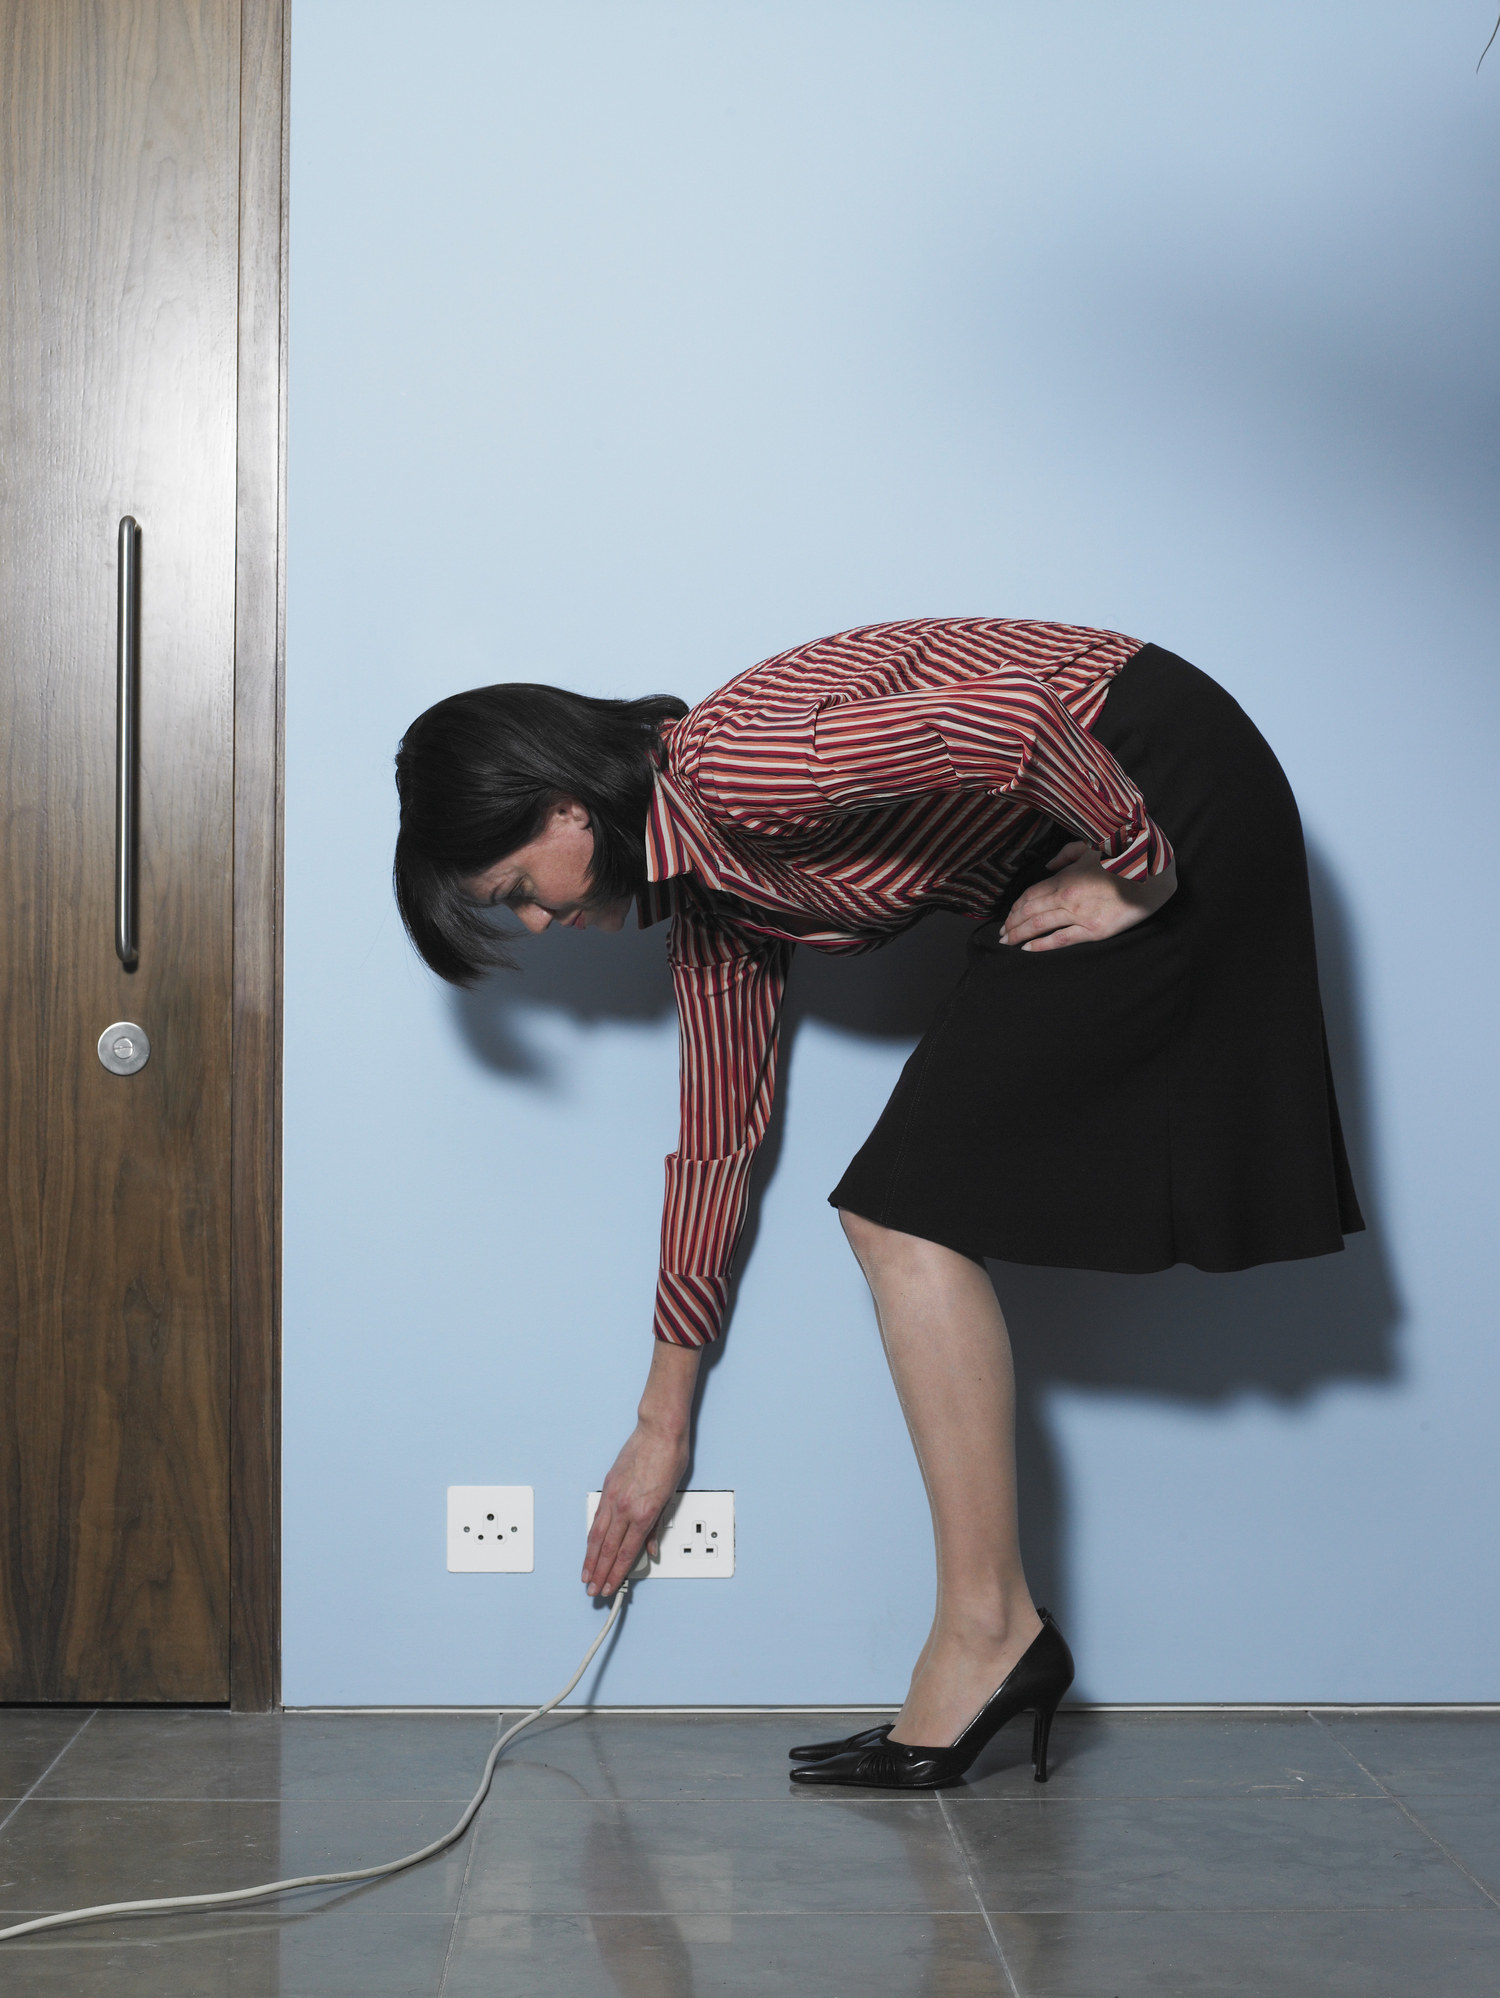 A woman bending down to plug something into the wall